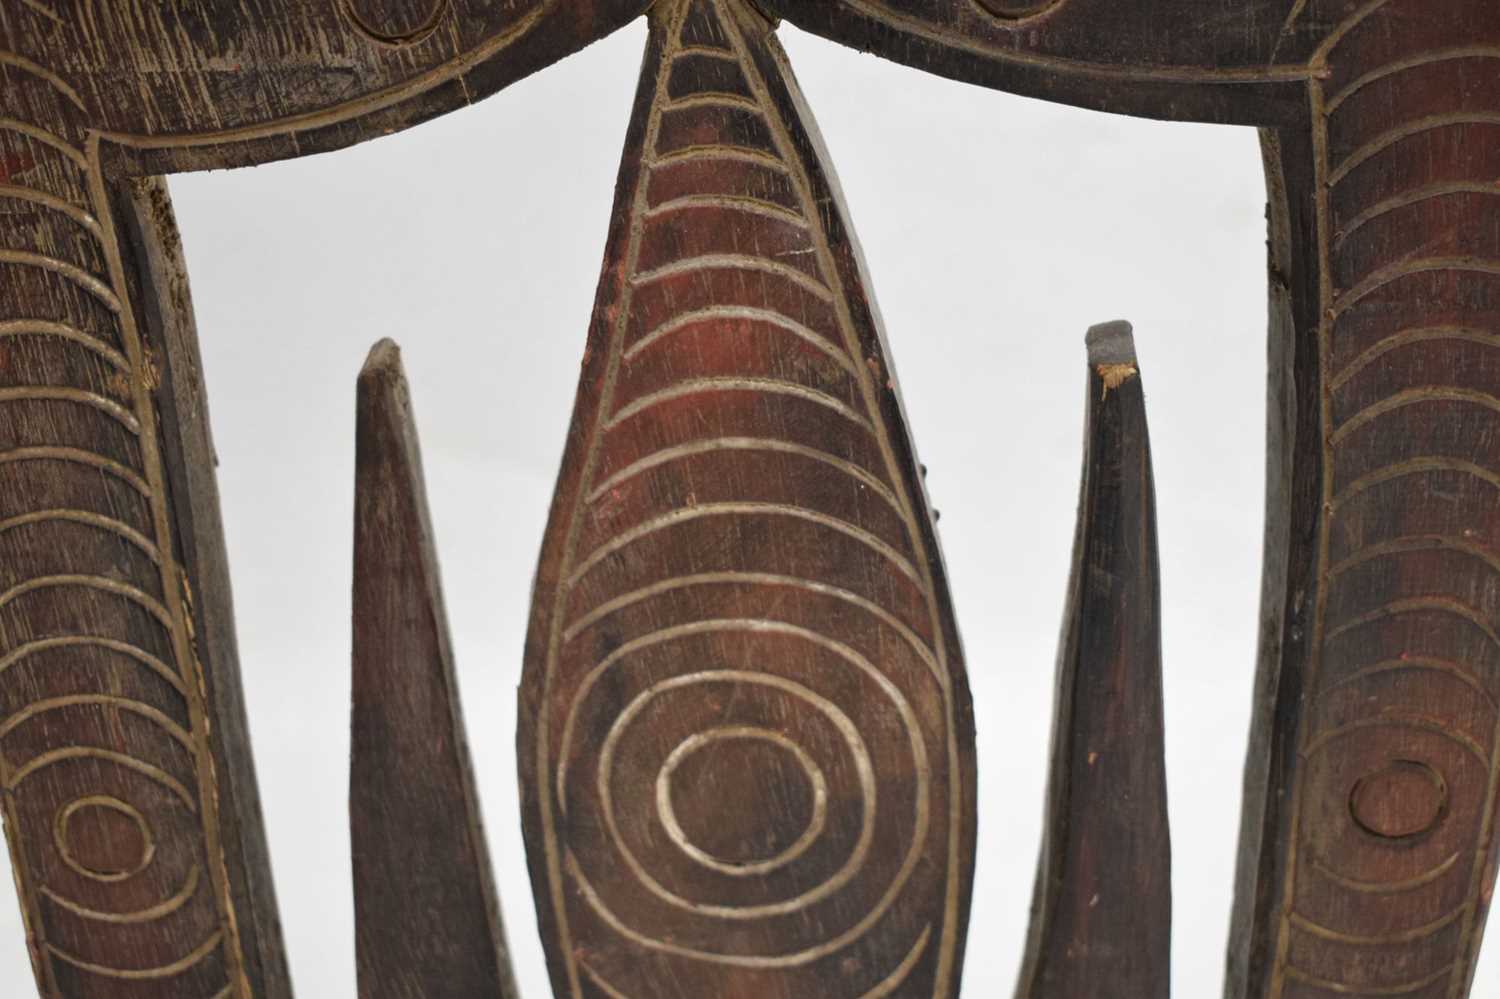 Ethnographica - Carved wooden skull hook / hanger or 'Agiba', Kerewa people, Papua New Guinea - Image 7 of 17